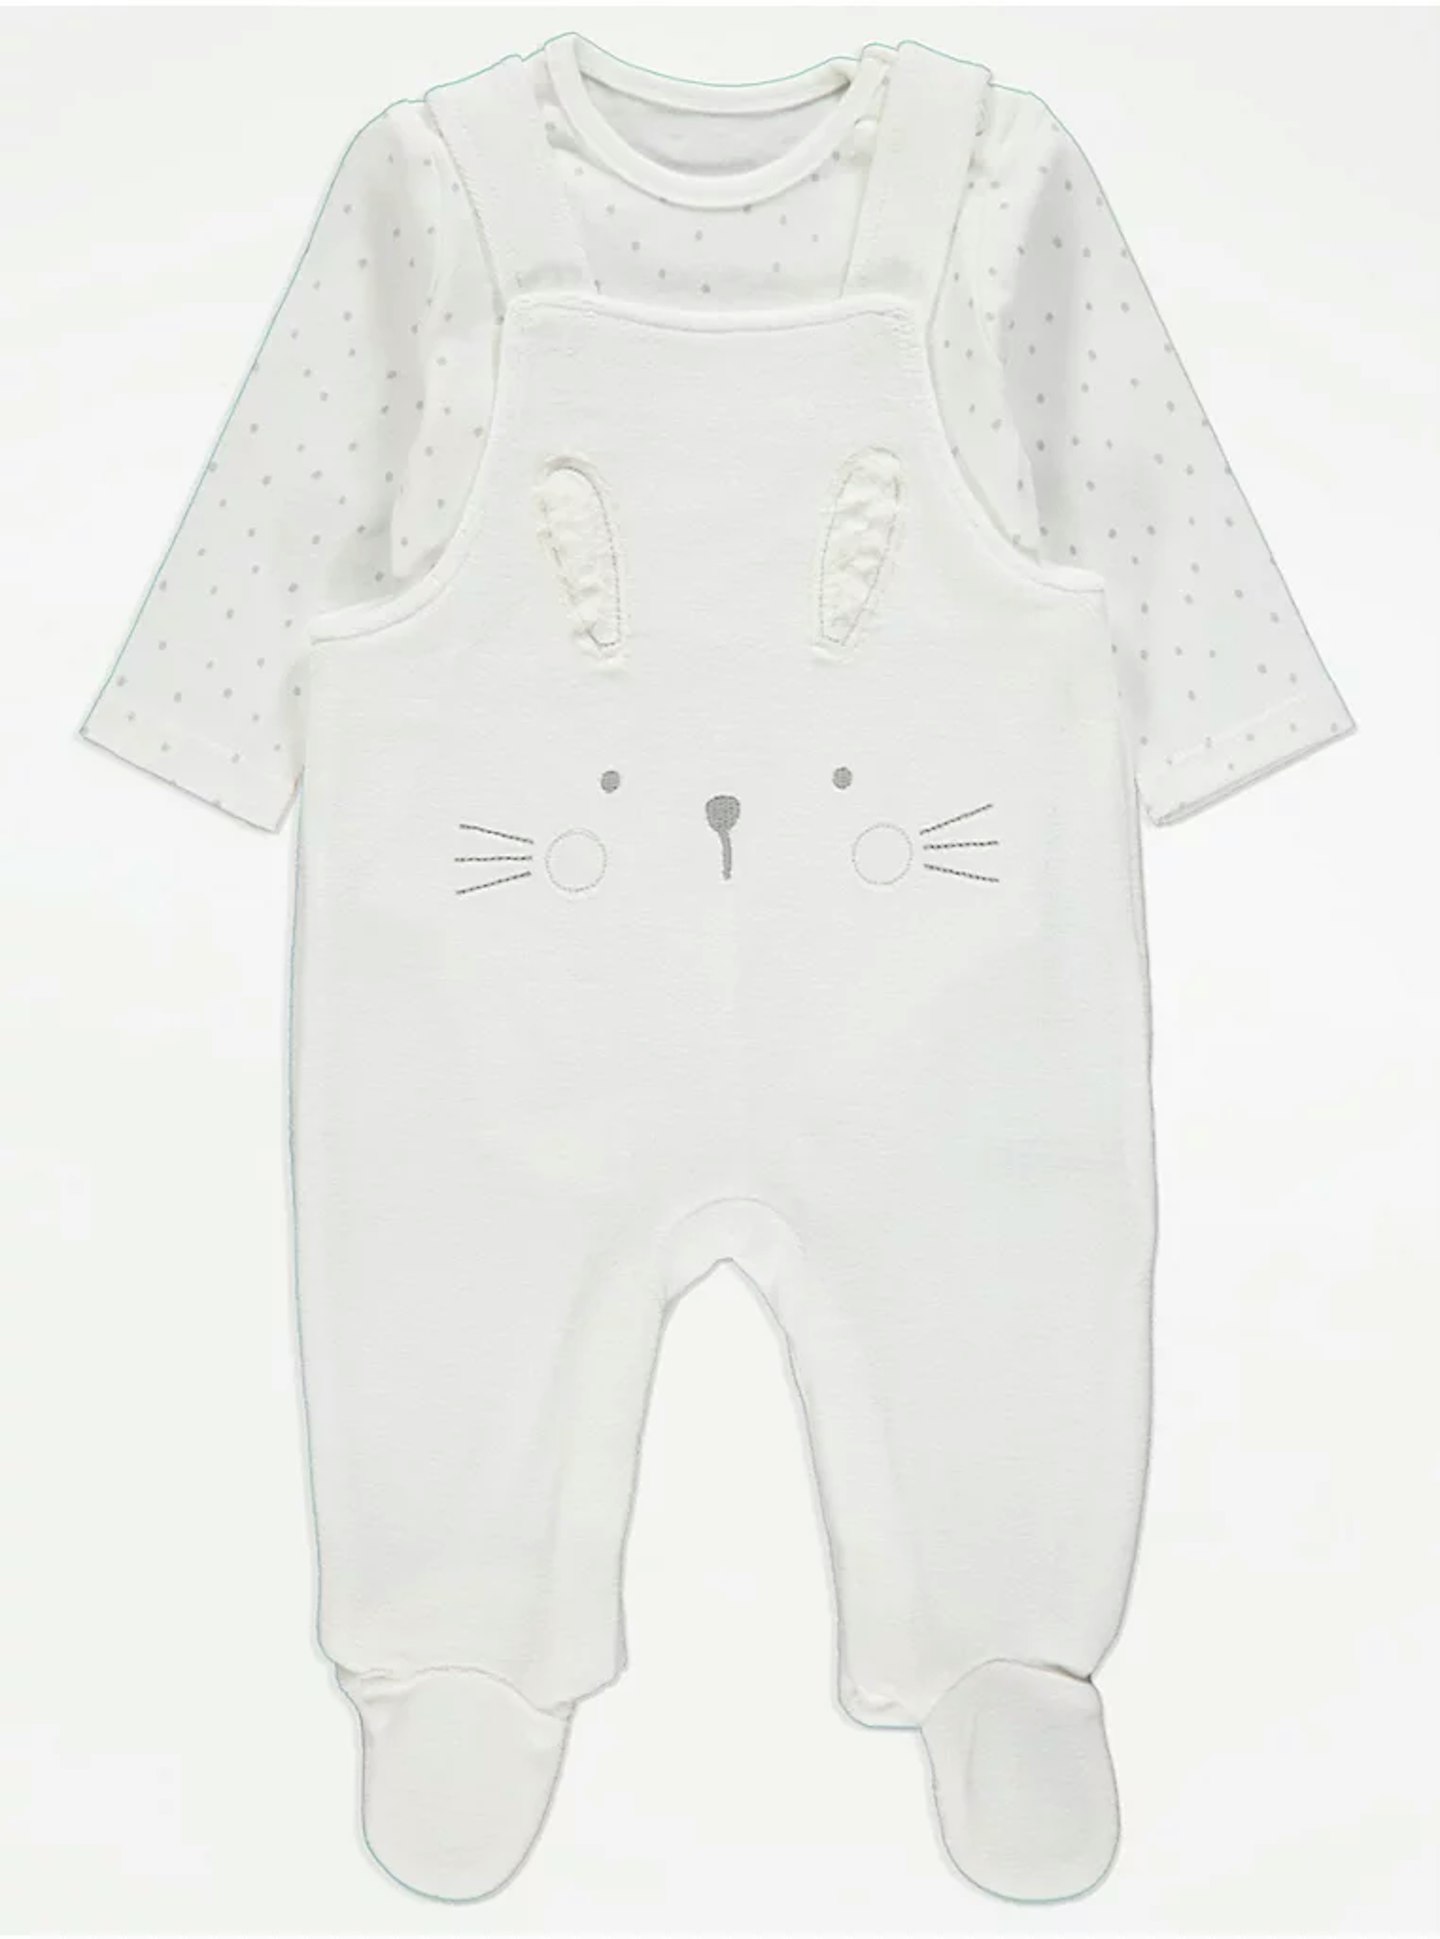 White Bunny Print Dungarees and Bodysuit Outfit